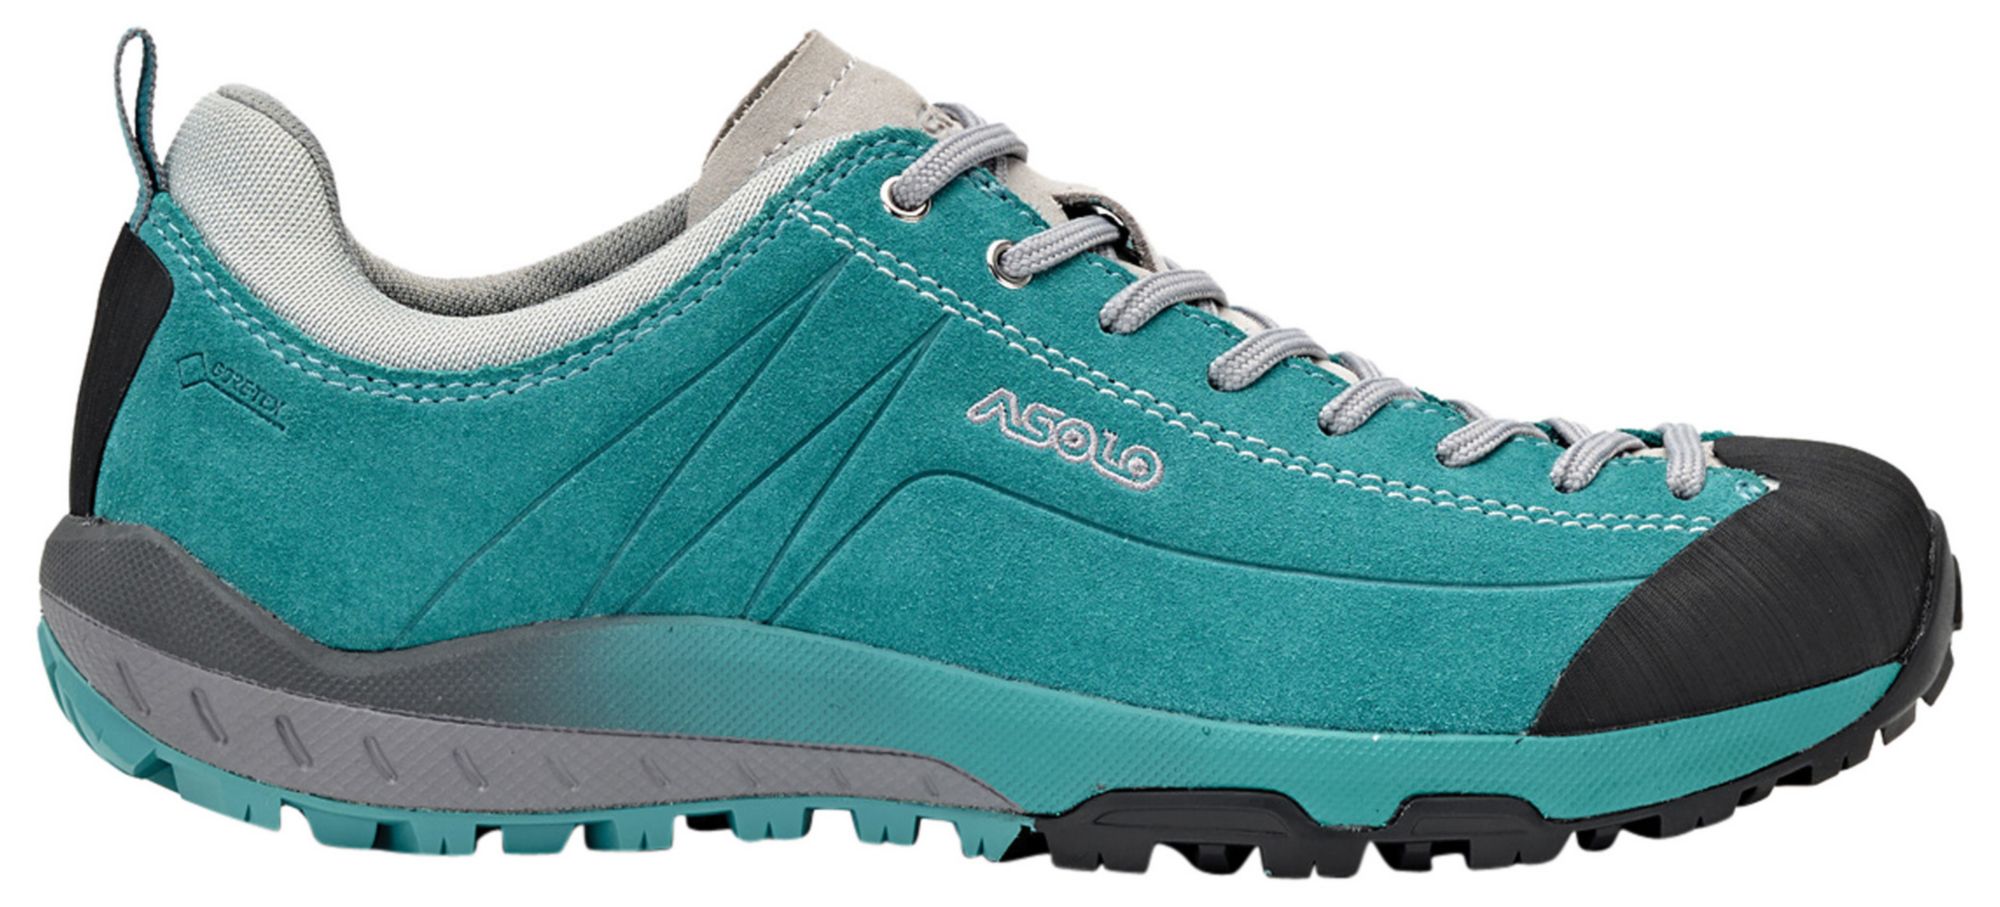 Photos - Trekking Shoes ASOLO Women's Space GV Waterproof Hiking Shoes, Size 8, North Sea 23QHGWWS 